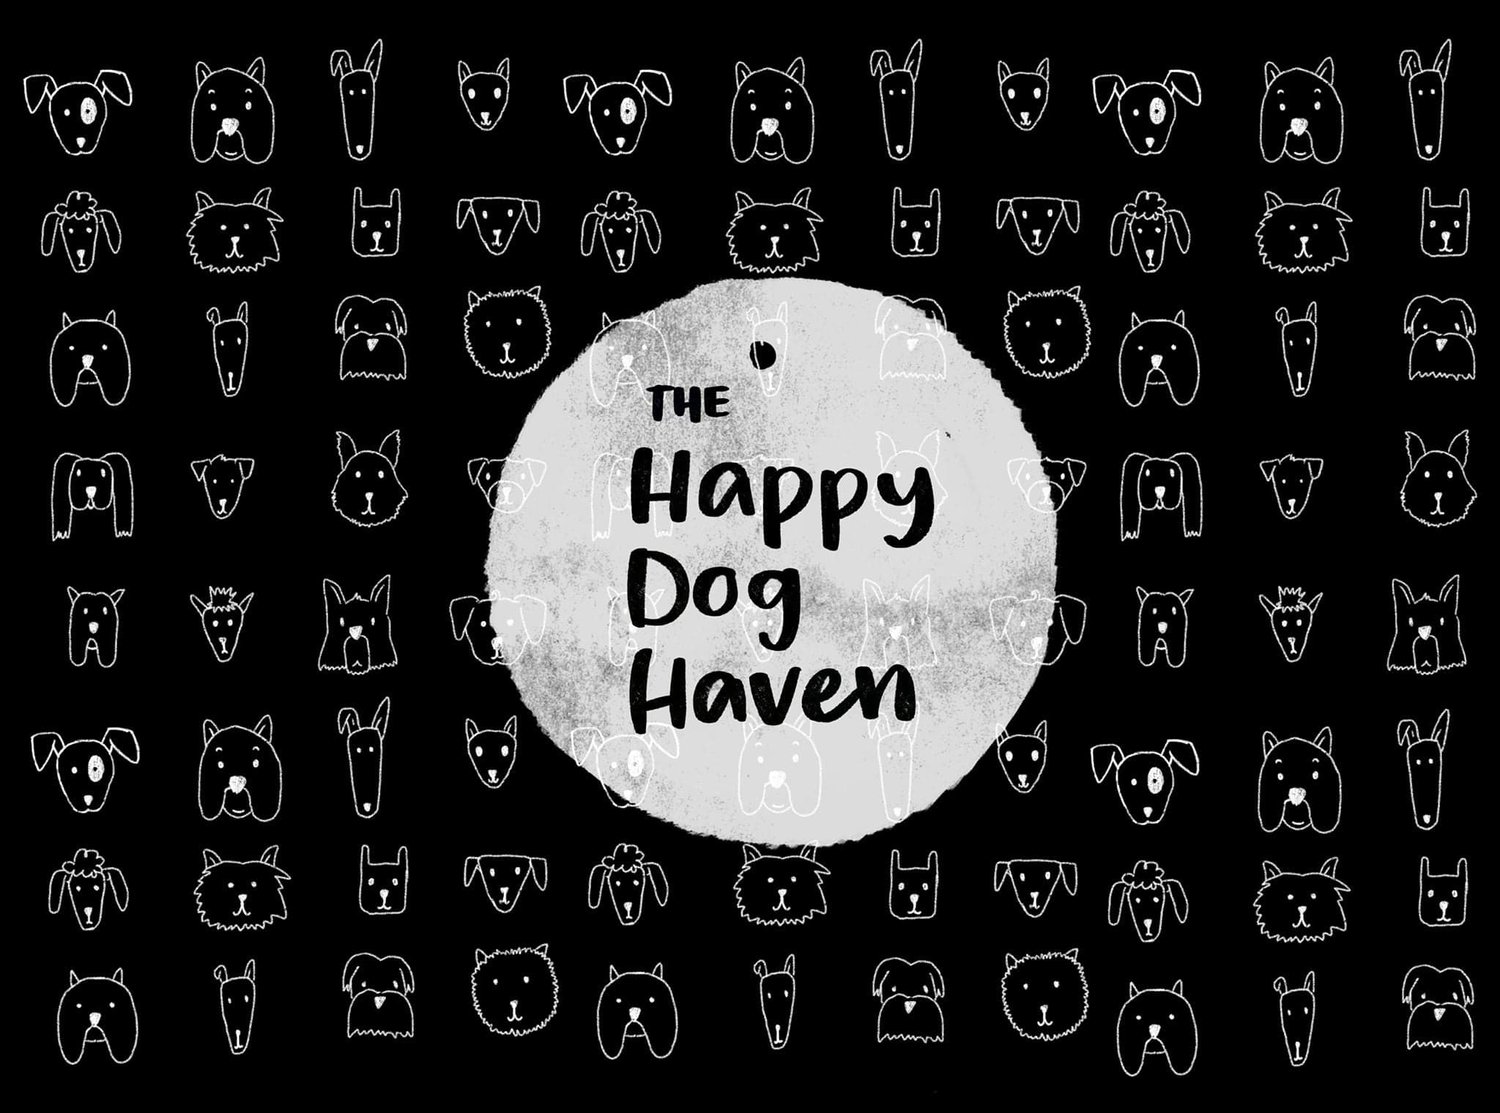 The Happy Dog Haven